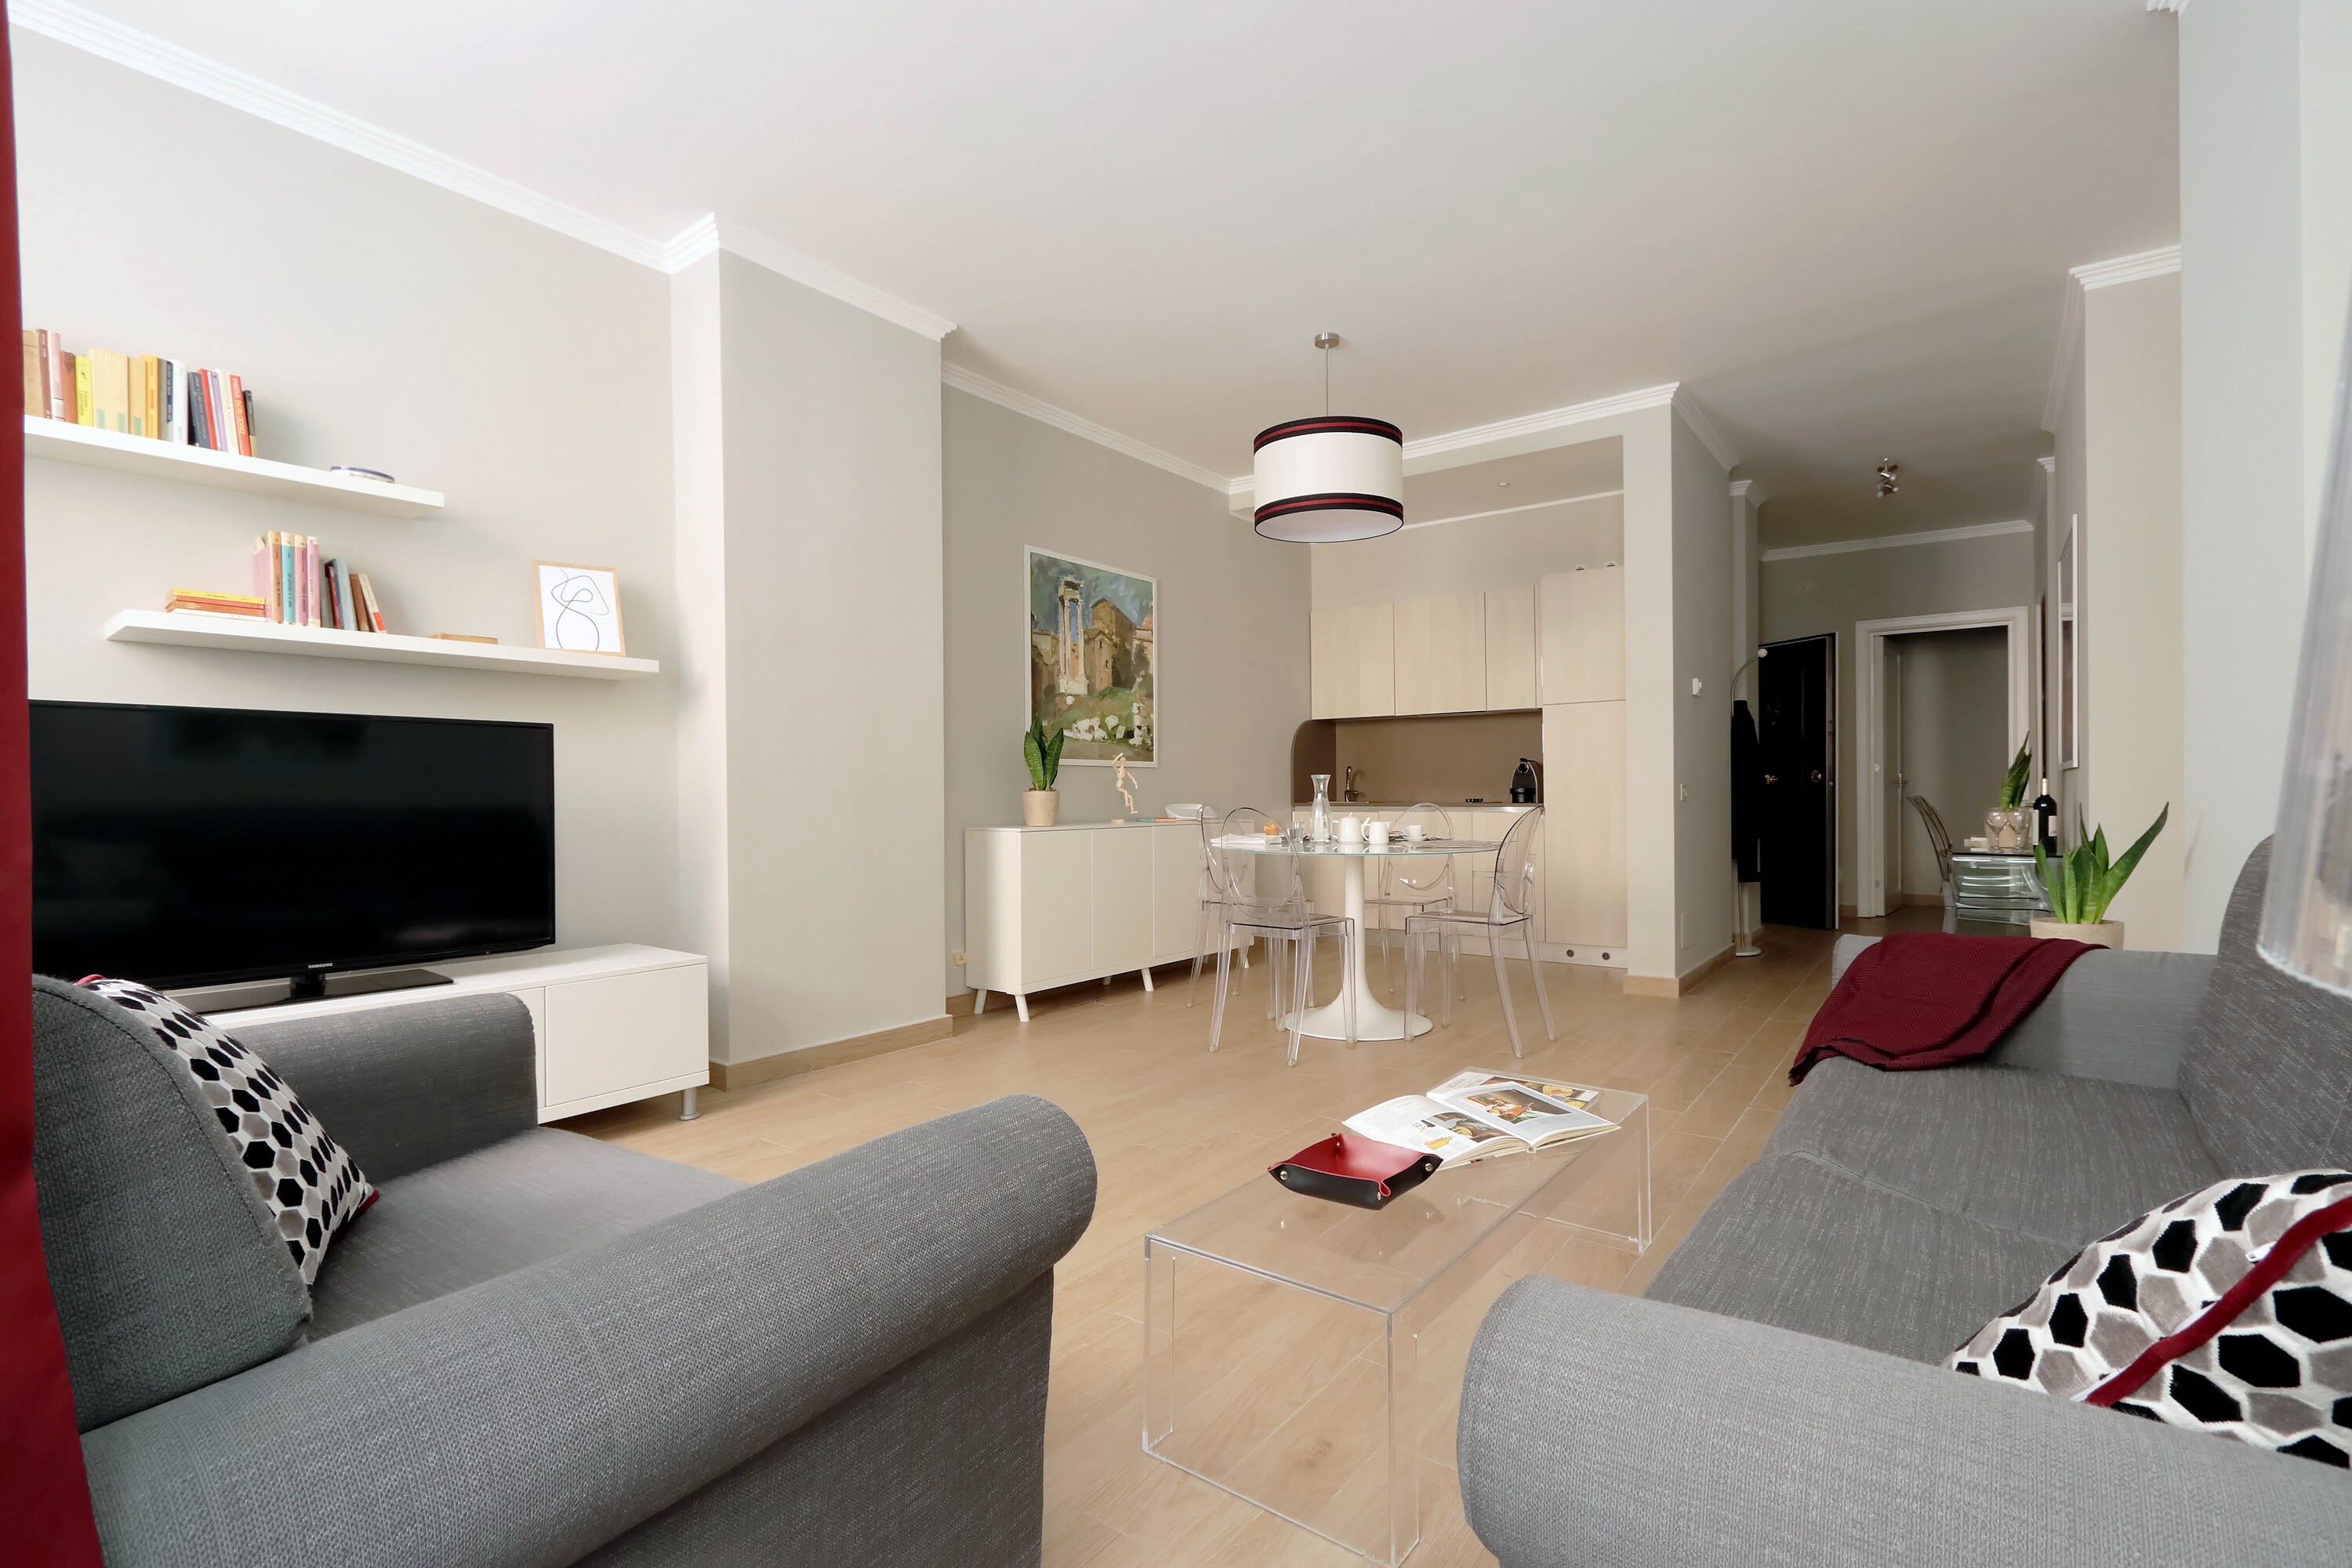 Property Image 2 - Alluring Spacious Apartment near Main Attractions